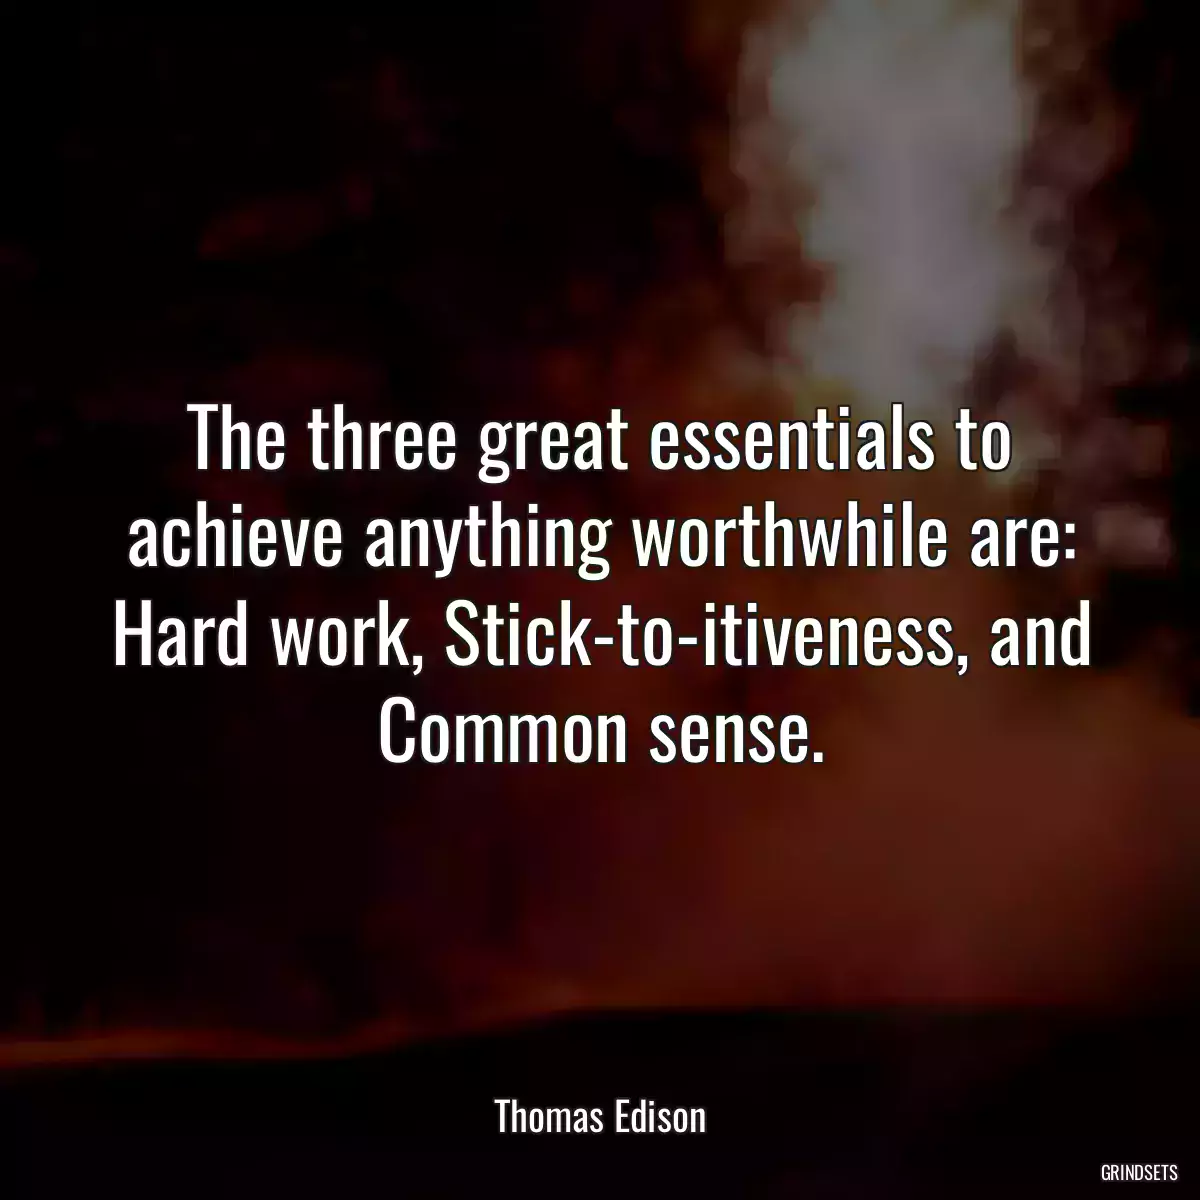 The three great essentials to achieve anything worthwhile are: Hard work, Stick-to-itiveness, and Common sense.